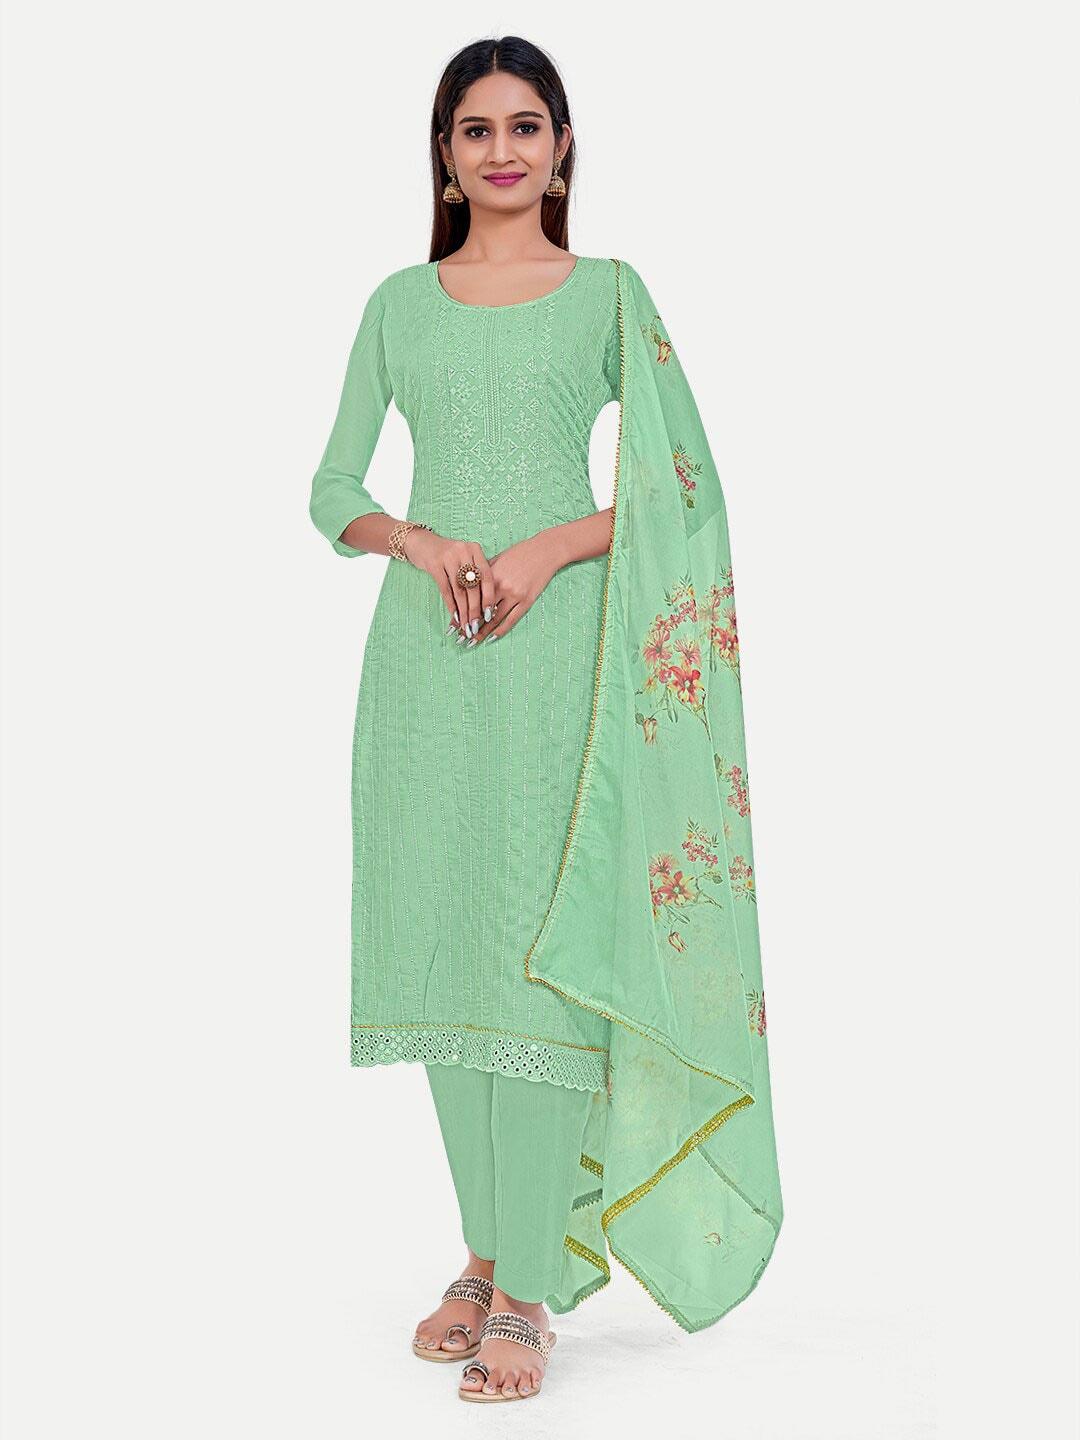 TAVAS Green Embroidered Unstitched Dress Material